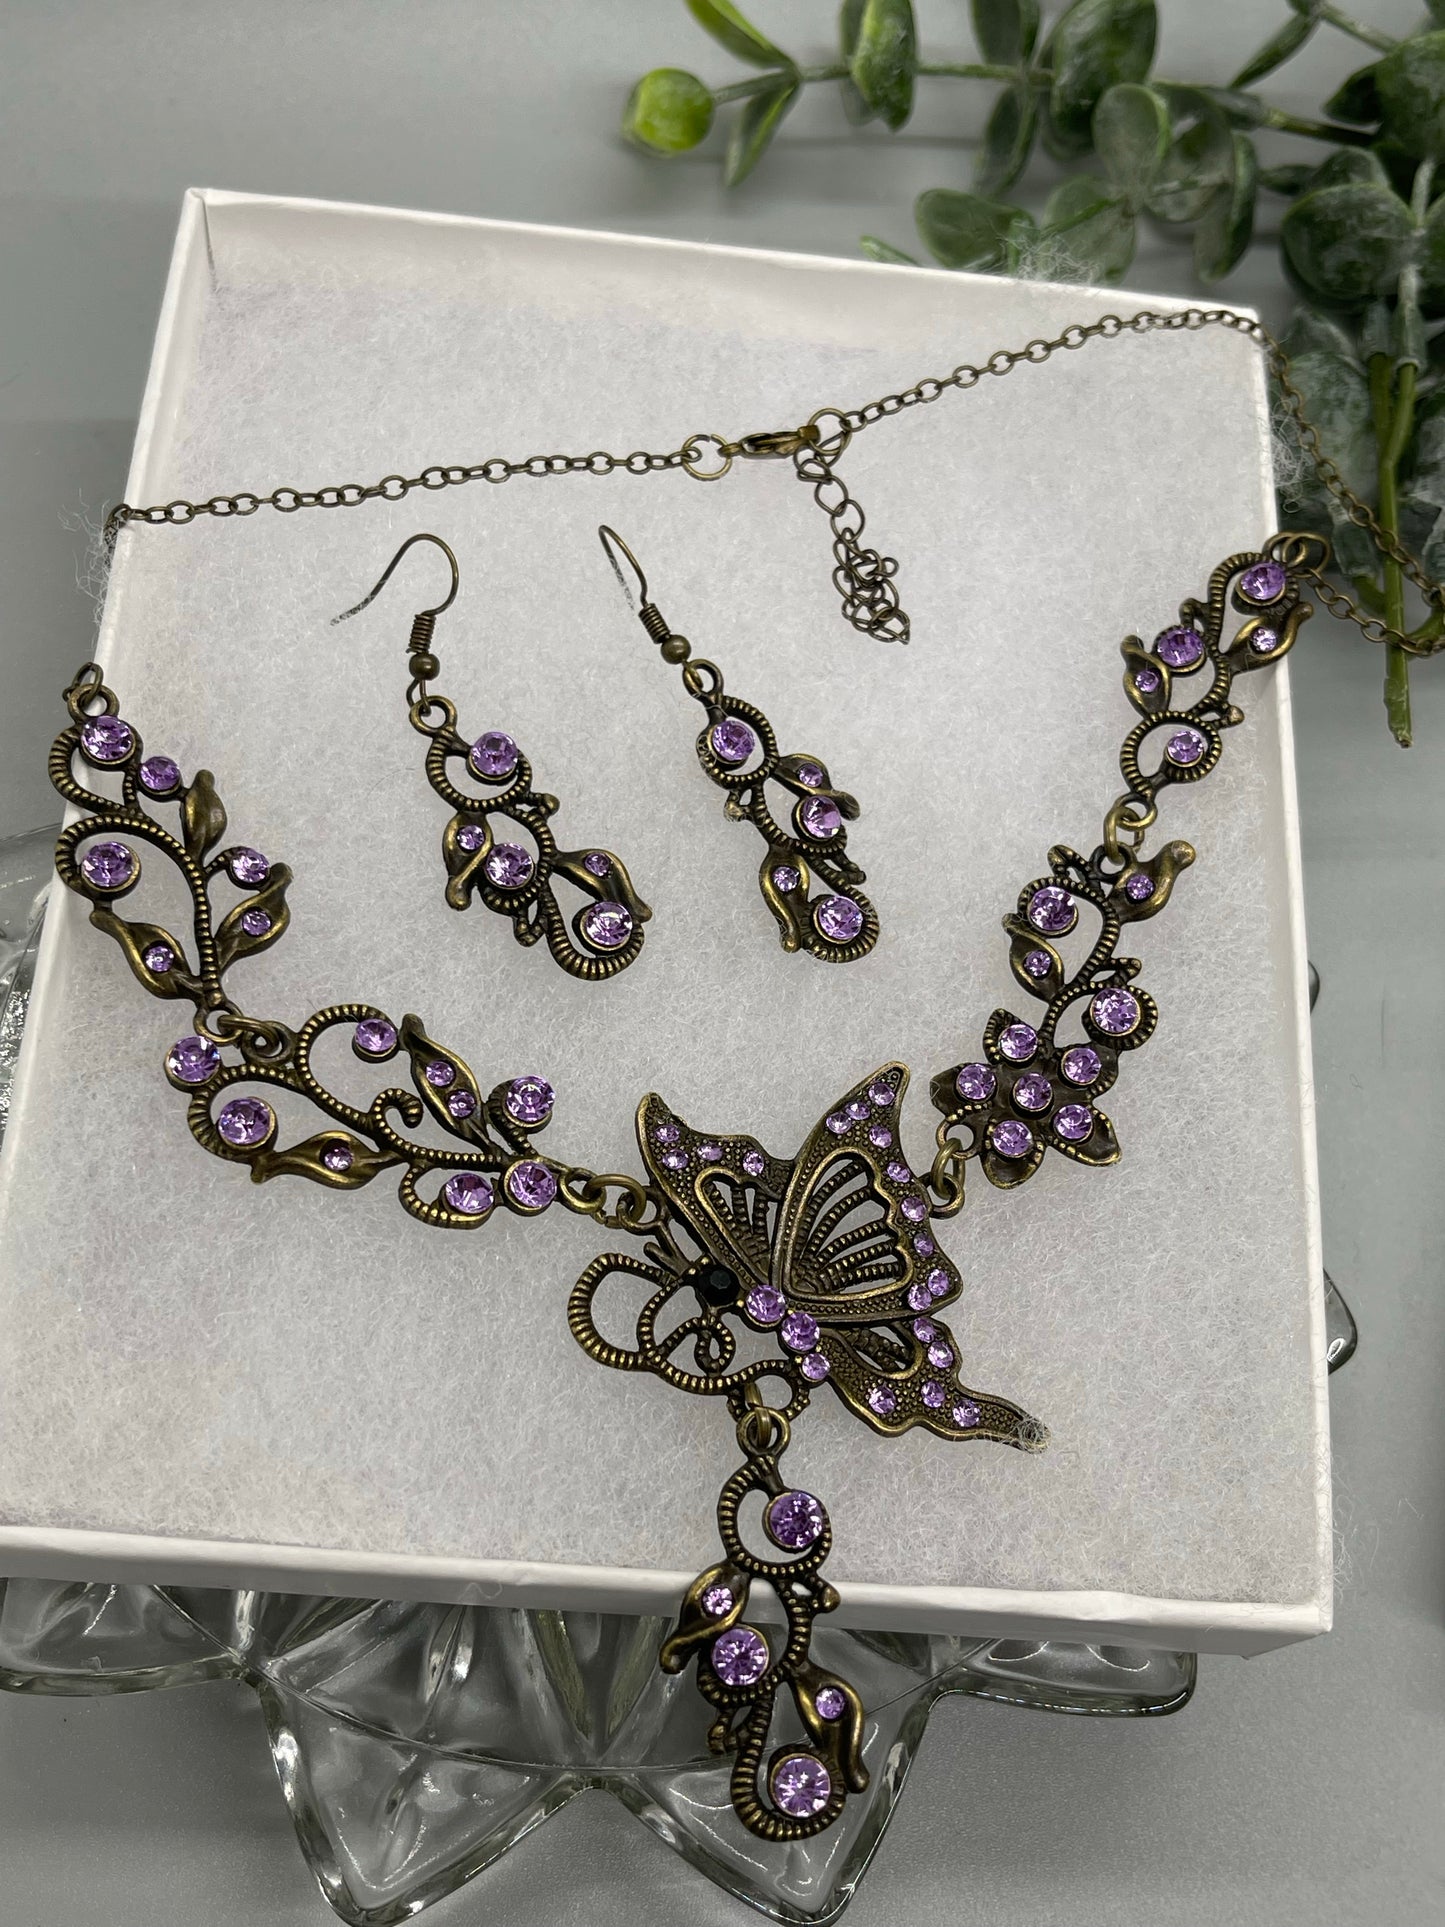 Lavender purple rhinestone crystal necklace earrings set Rhinestone Jewelry Sets earring necklace wedding engagement formal party Prom